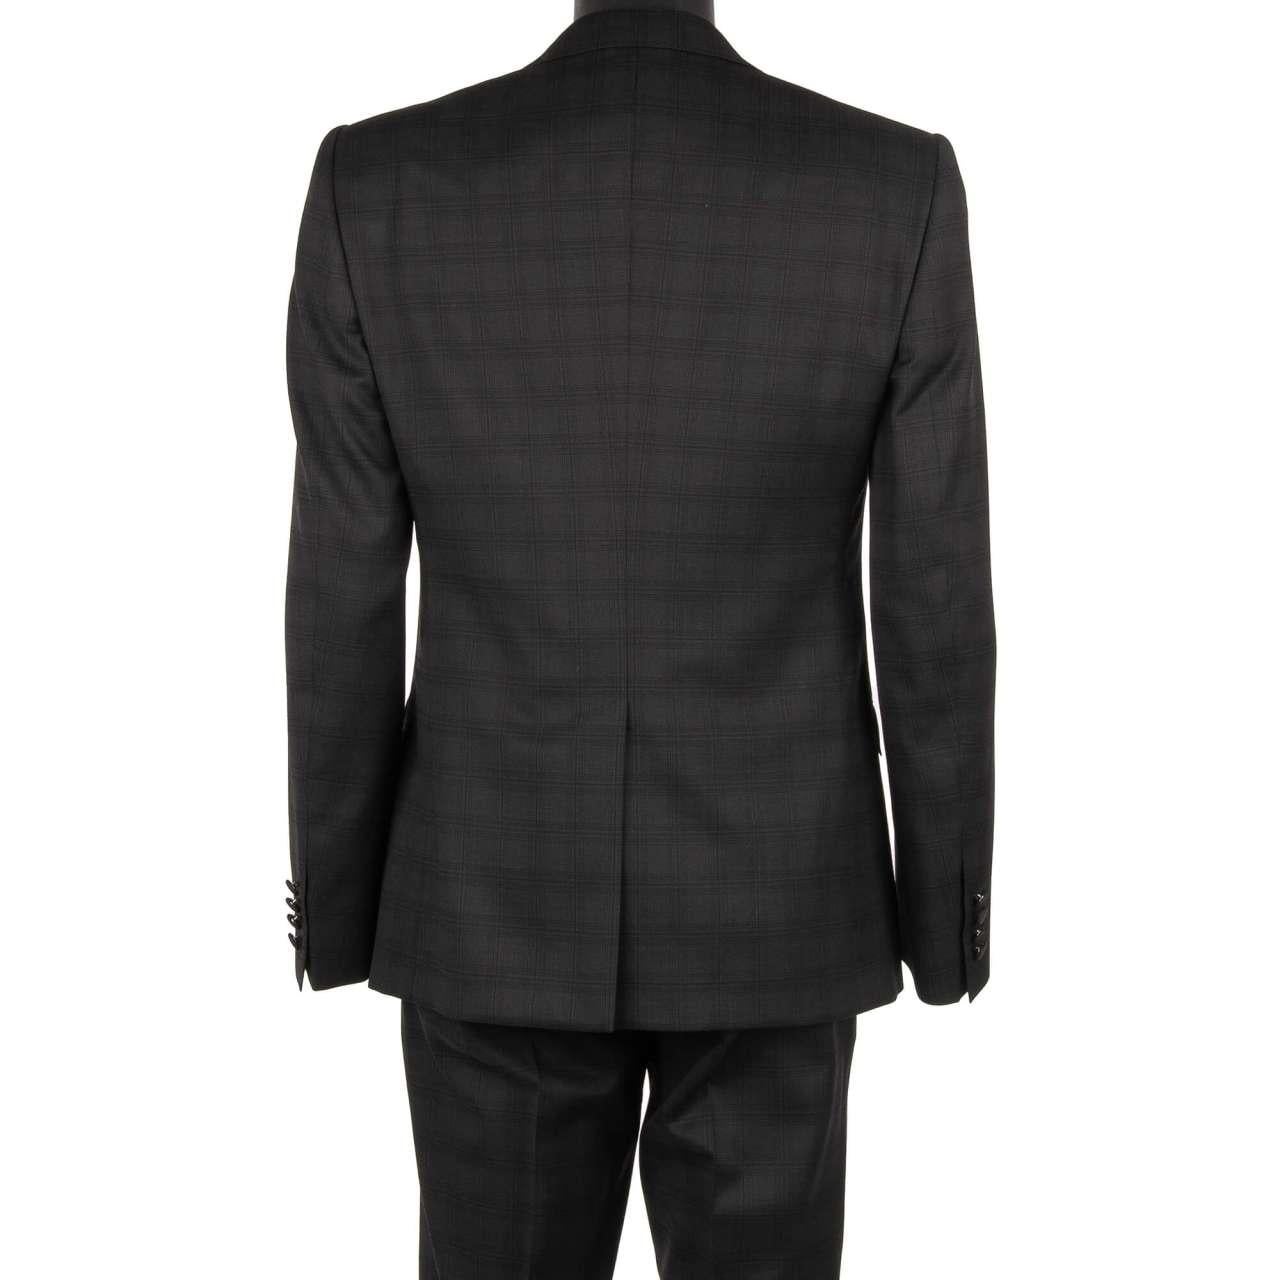 D&G 3 Piece Checked Suit Jacket Waistcoat Bee Brooch SICILIA Black 52 For Sale 2